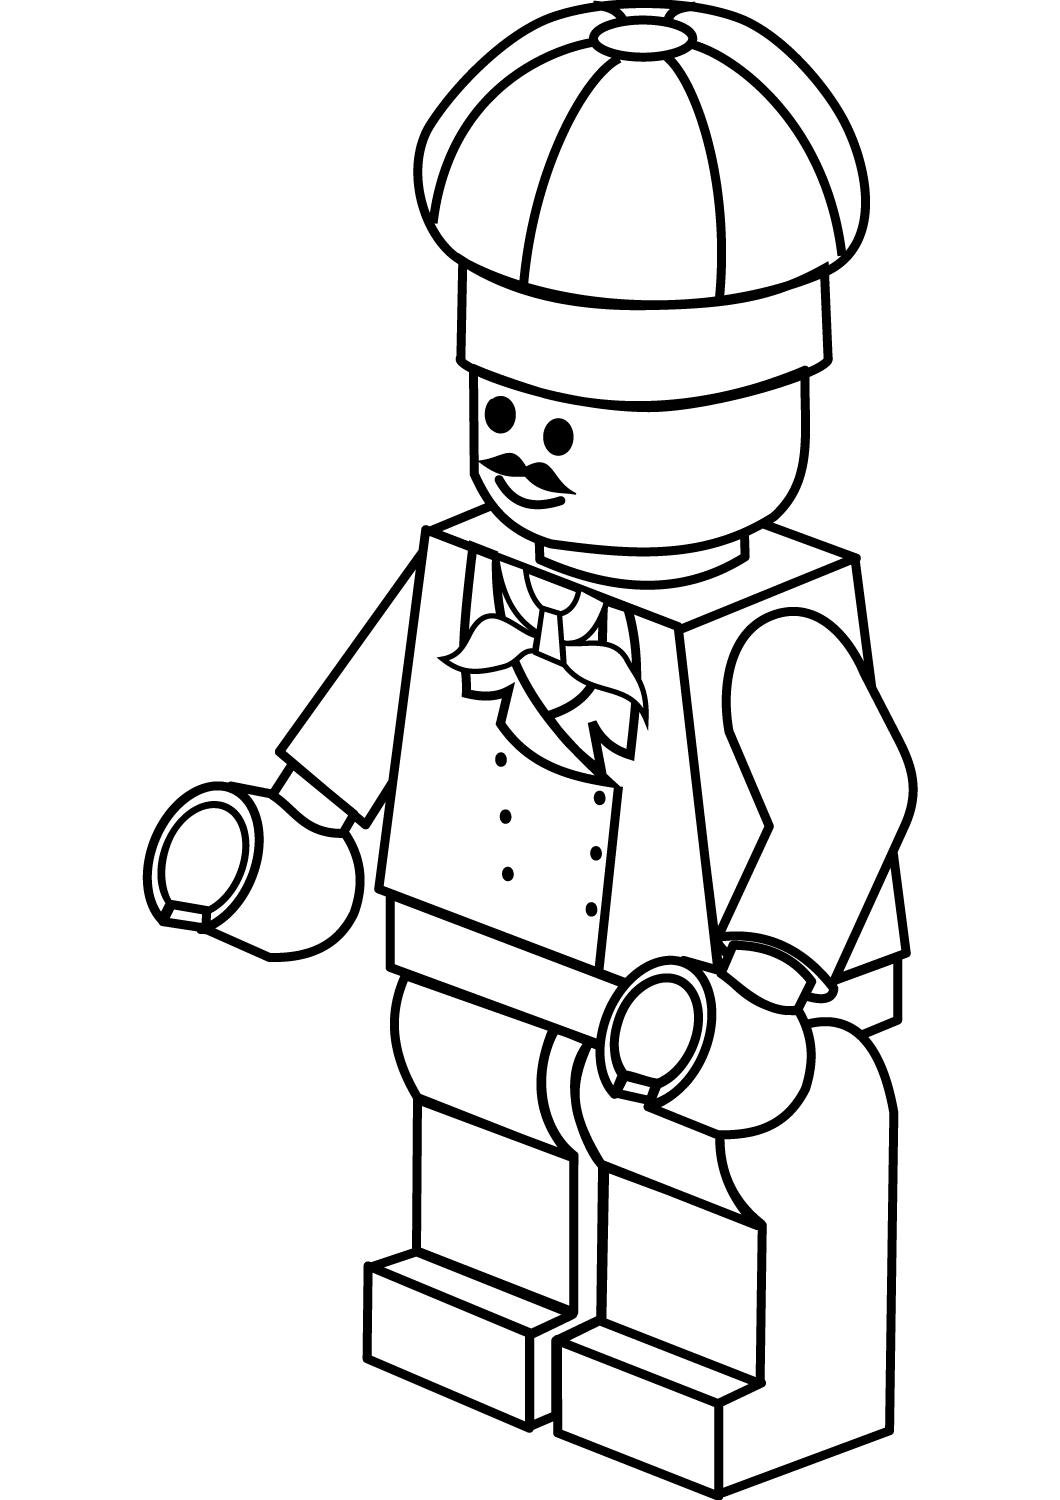 Lego Chef Coloring Page